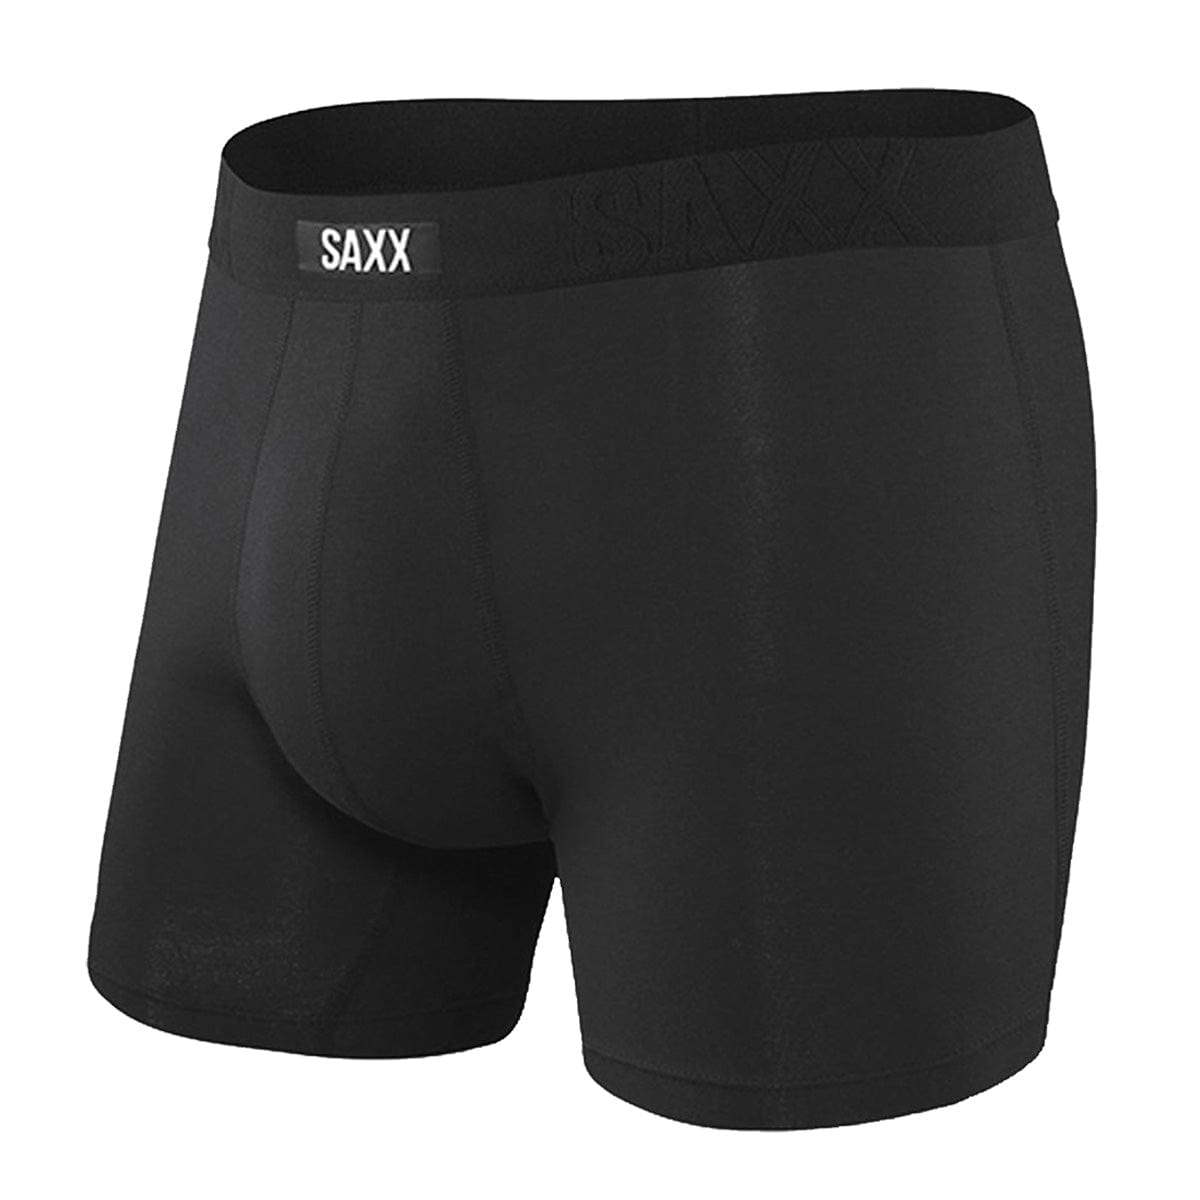 Saxx Undercover Boxers - Black - The Hockey Shop Source For Sports